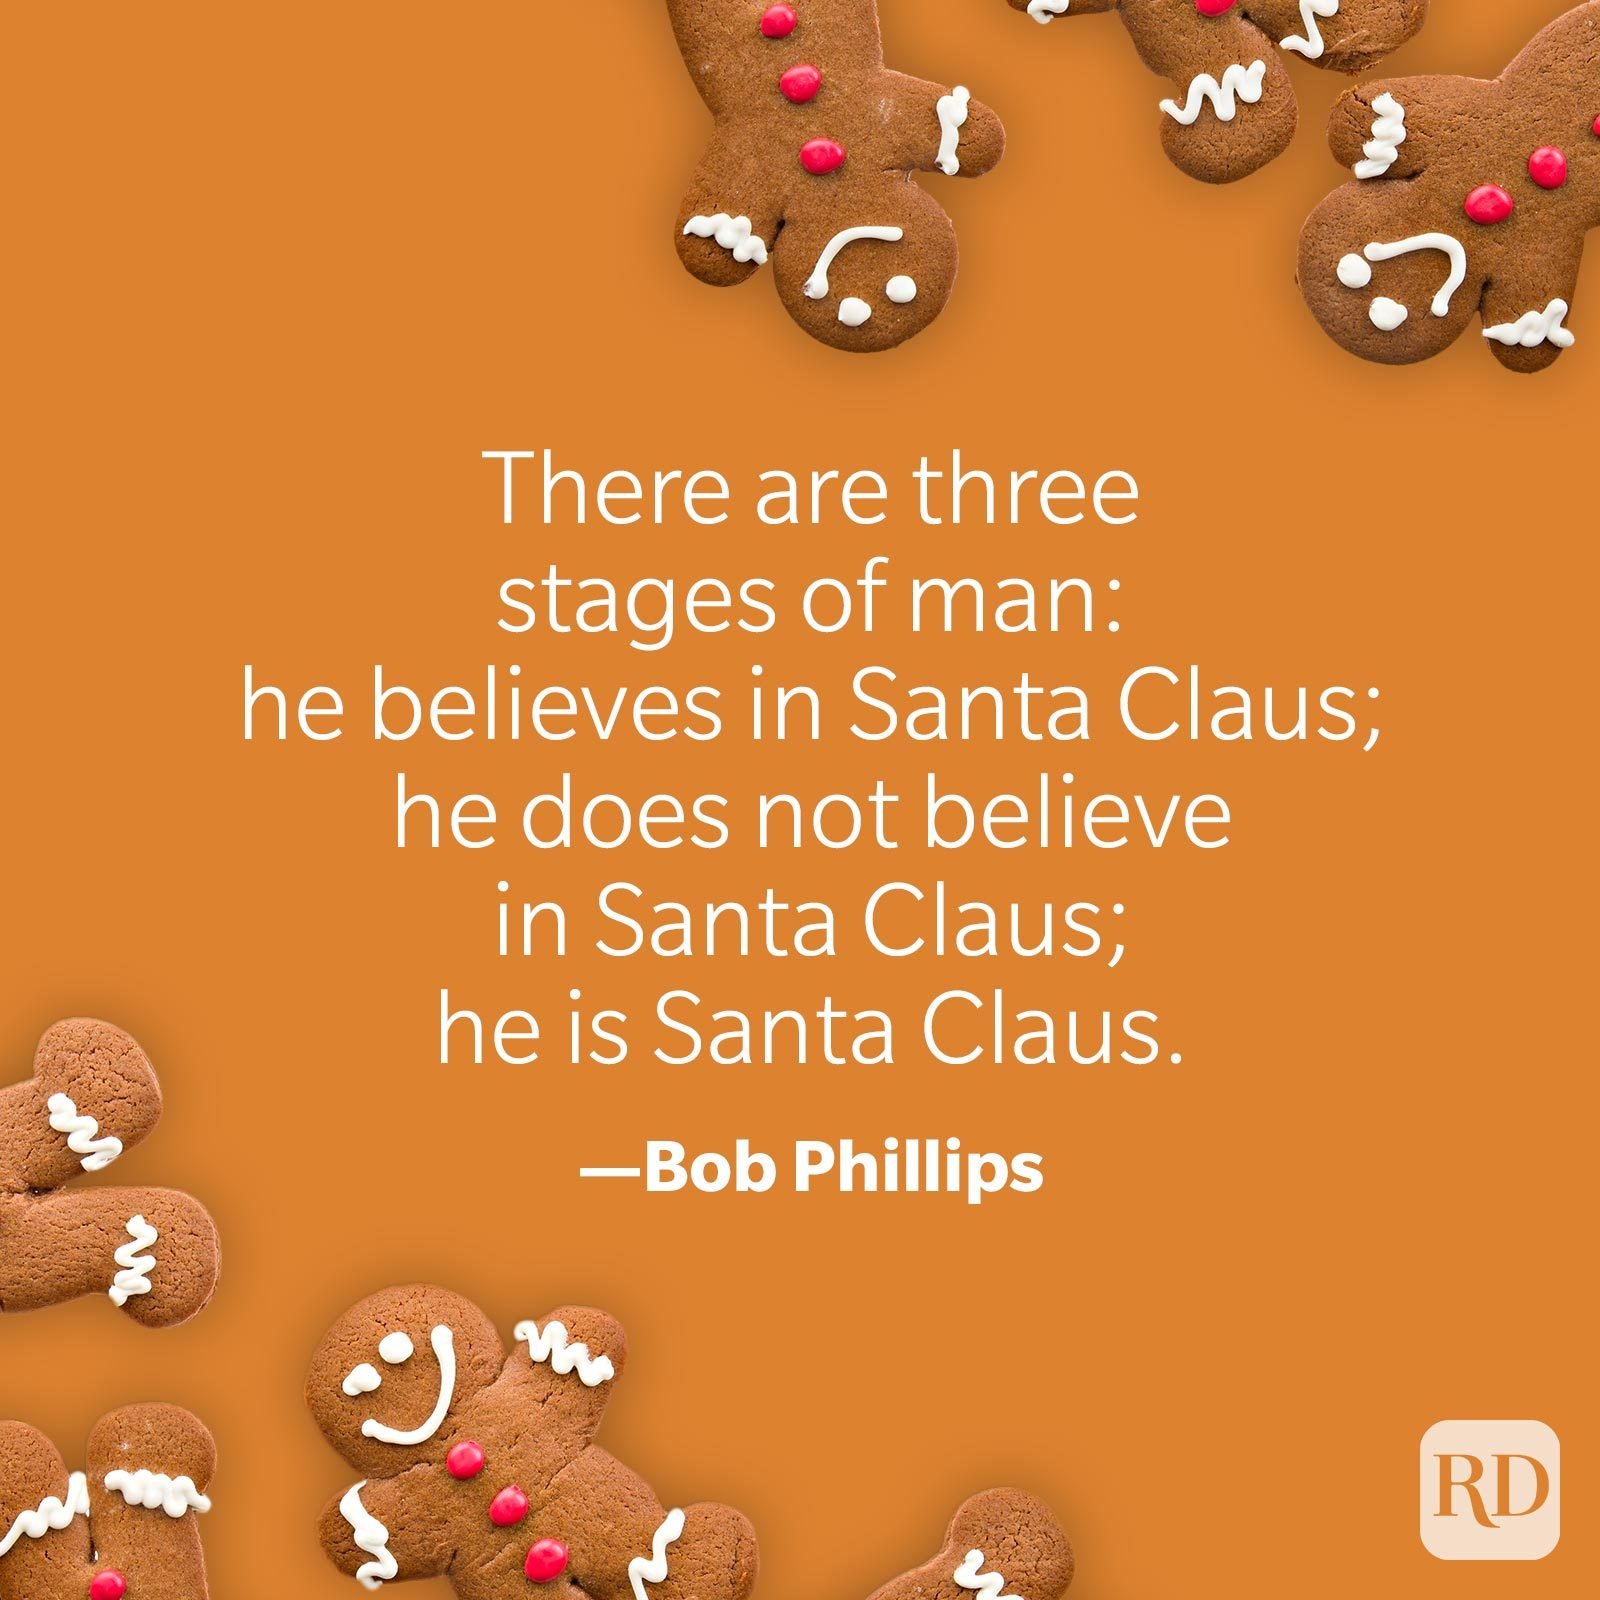 55 Funny Christmas Quotes to Share [2022]  Reader's Digest